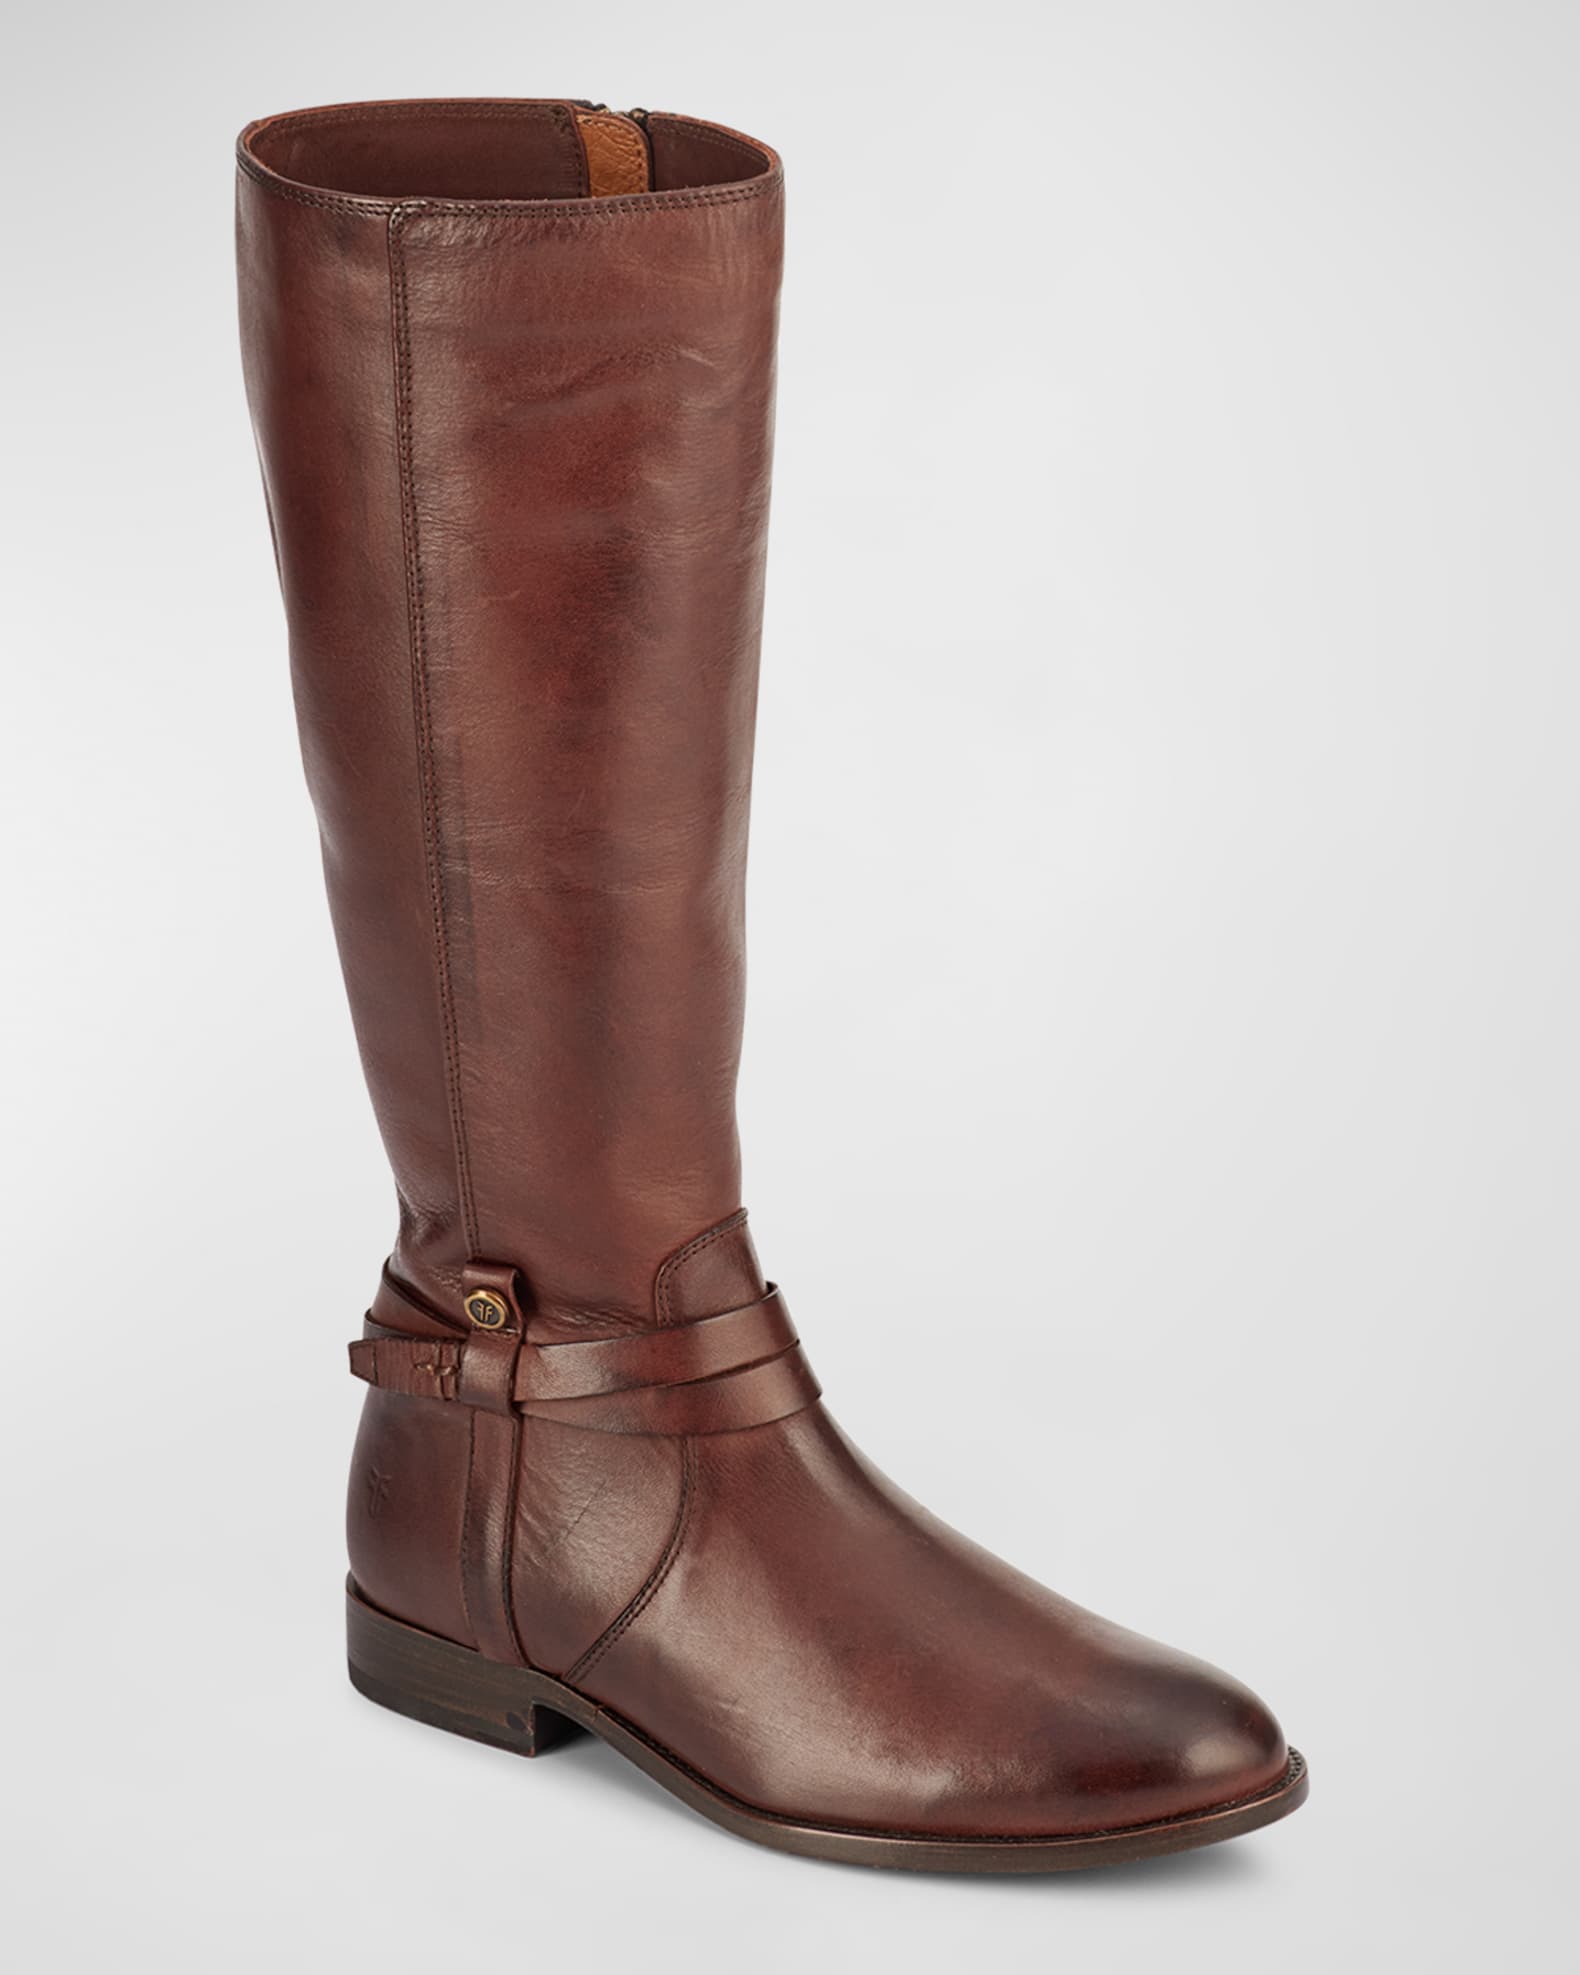 Frye Melissa Leather Belted Tall Riding Boots | Neiman Marcus